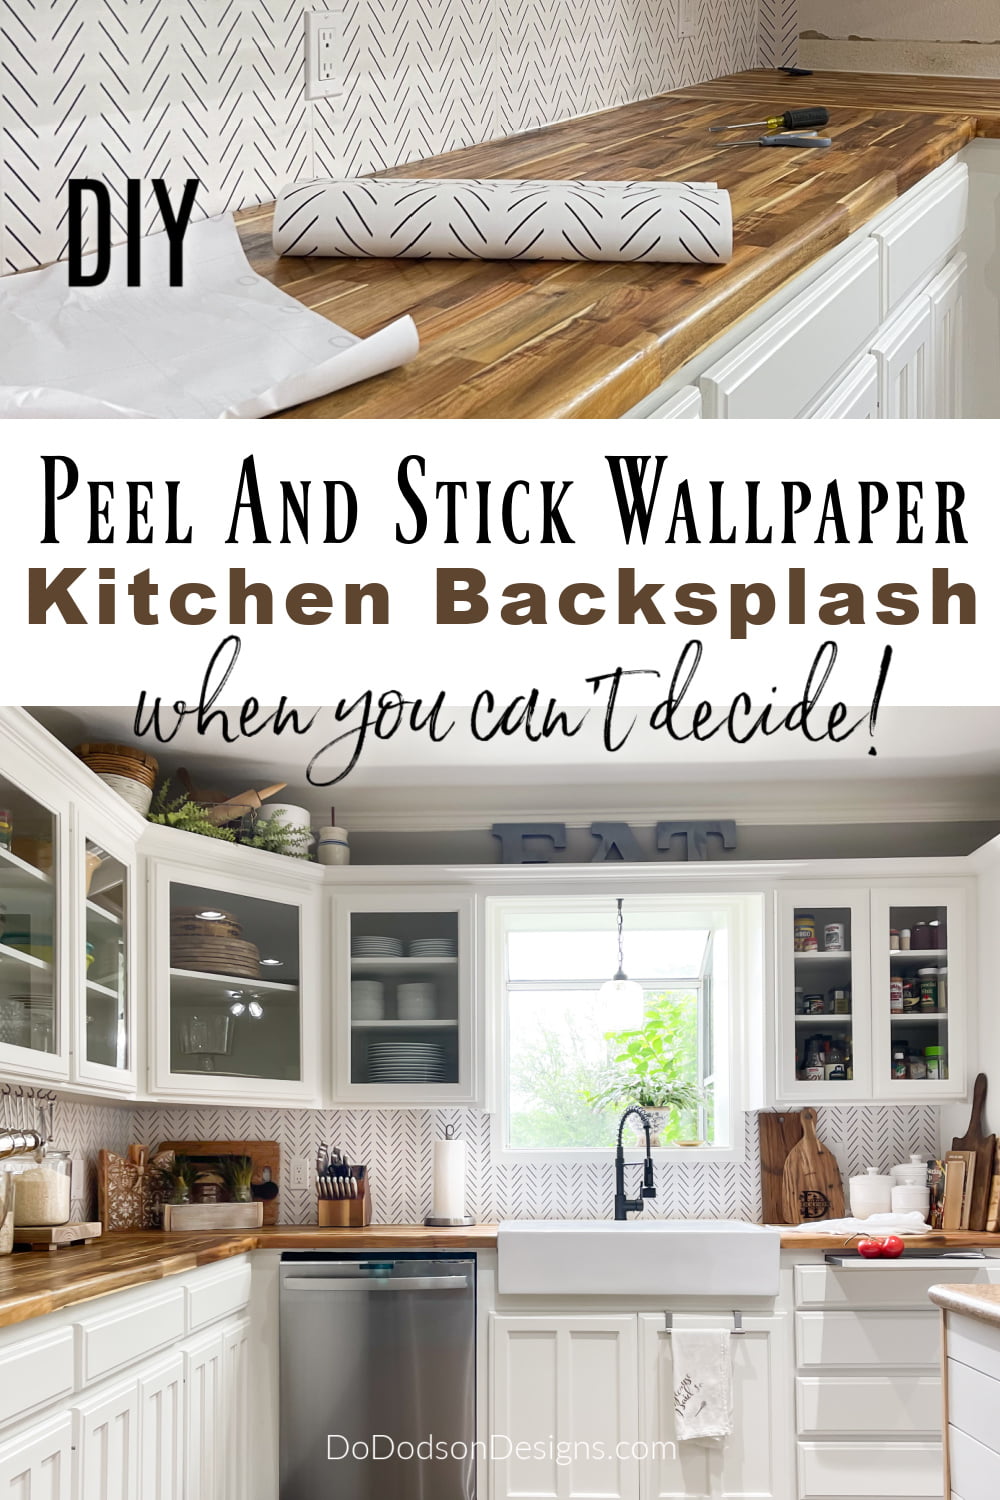 Peel And Stick Kitchen Backsplash (When You Can\'t decide)